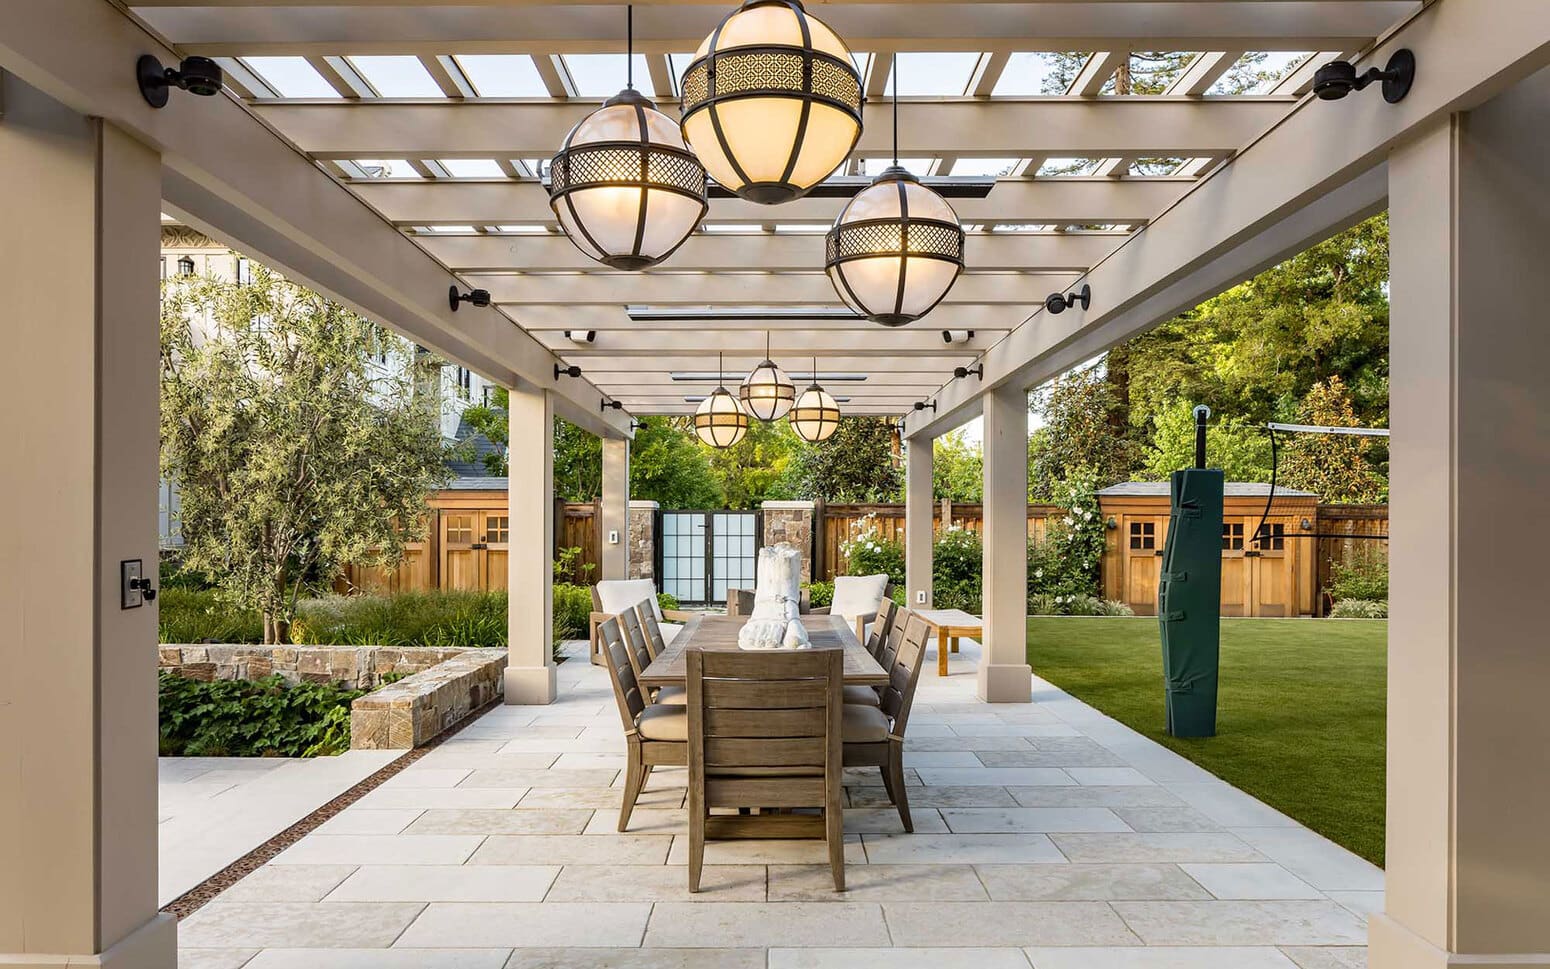 Loggia with lighting and outdoor dining